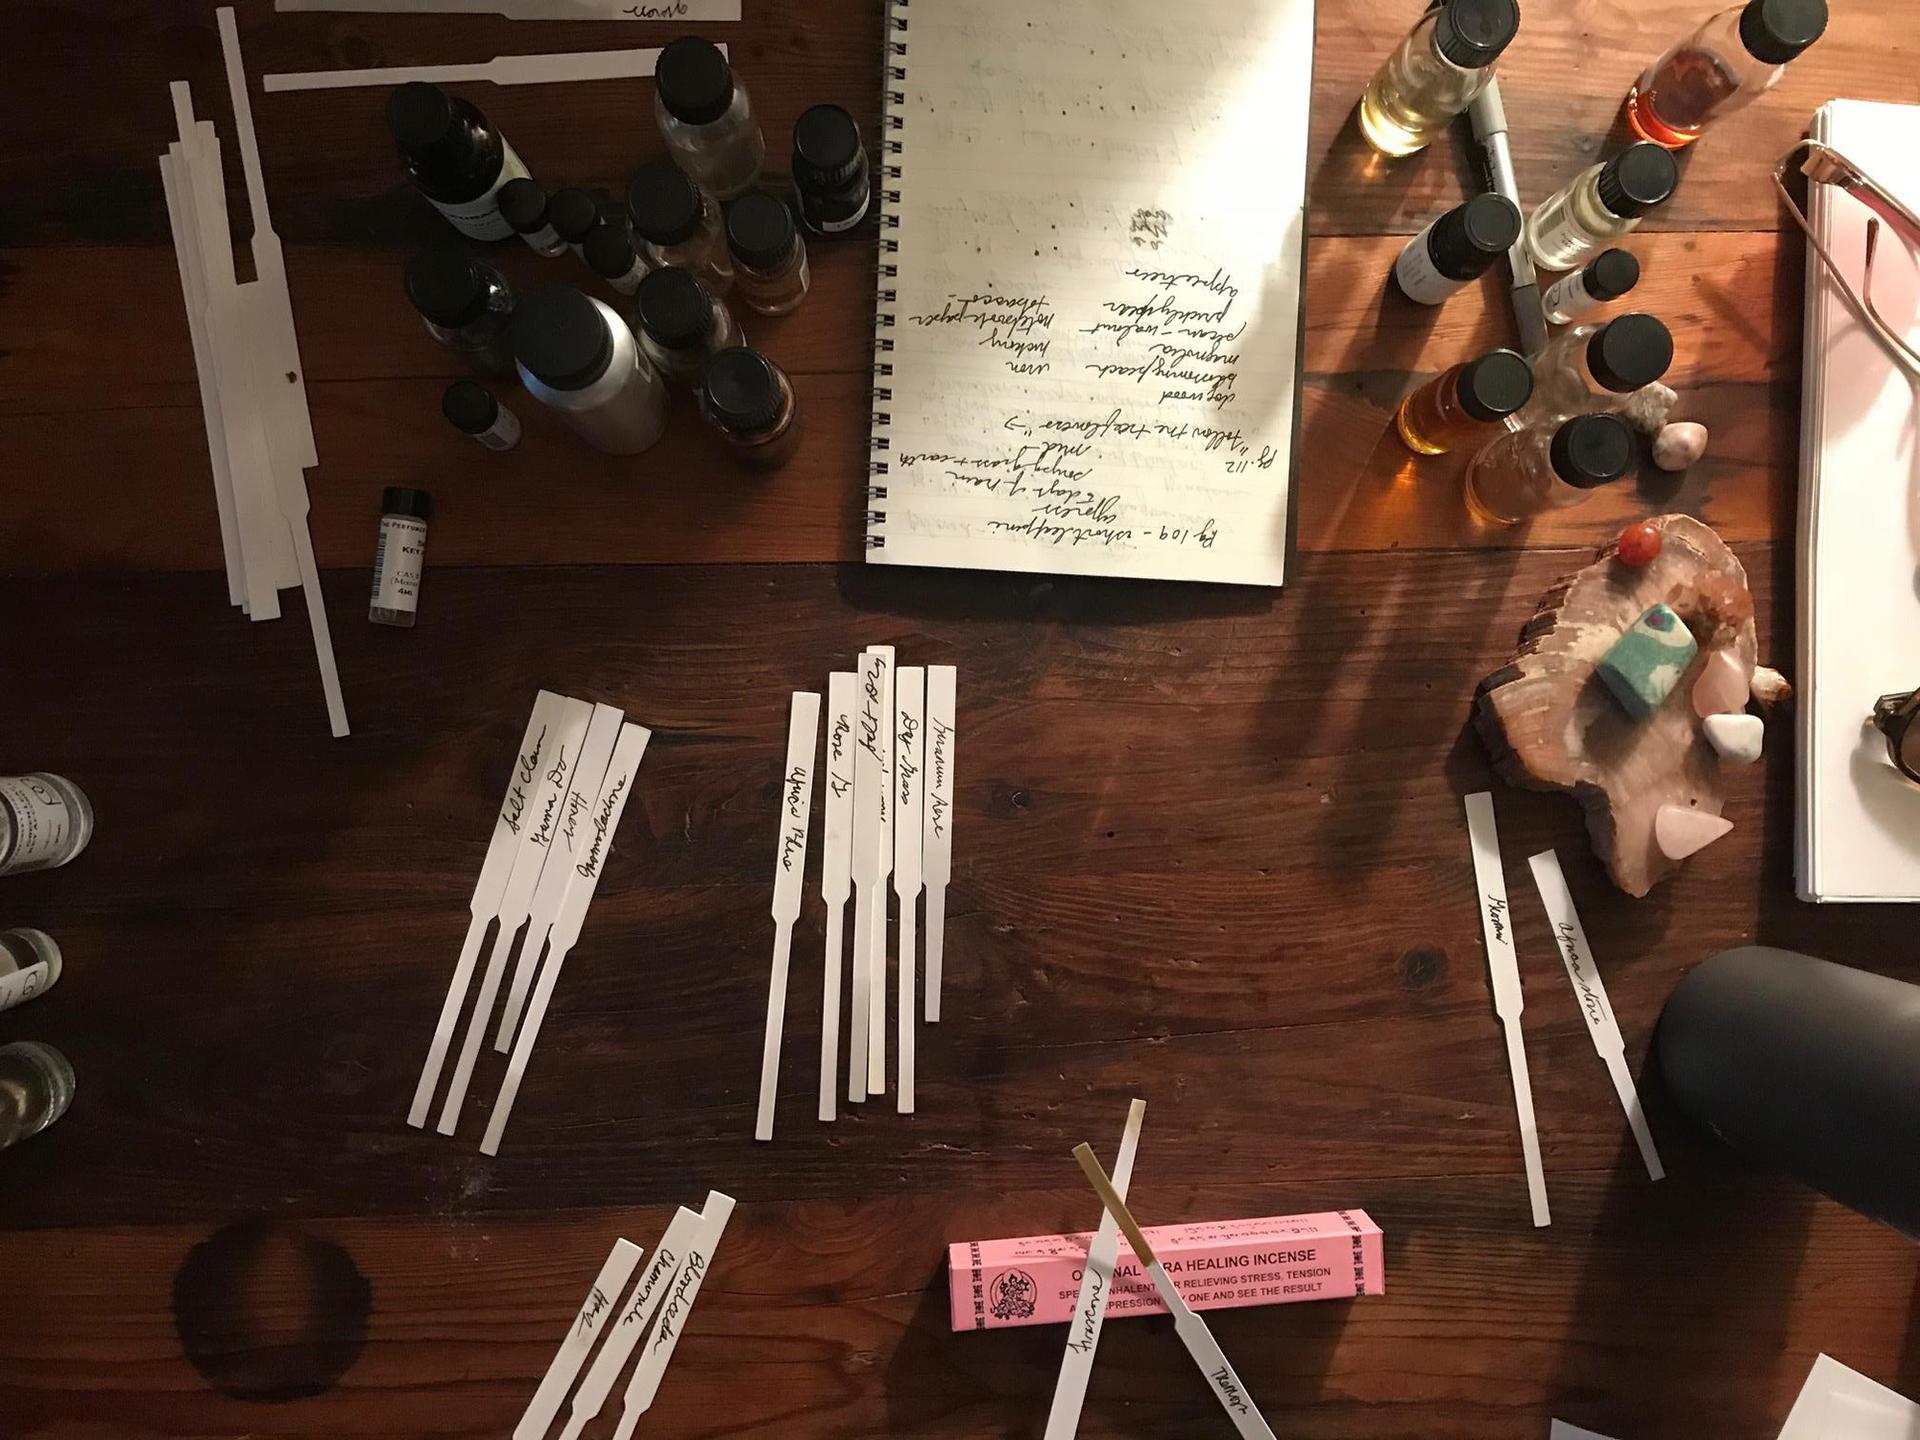 Tanwi Nandini Islam’s home dining table is covered in scents and testing strips as she builds her “Beloved” perfume.